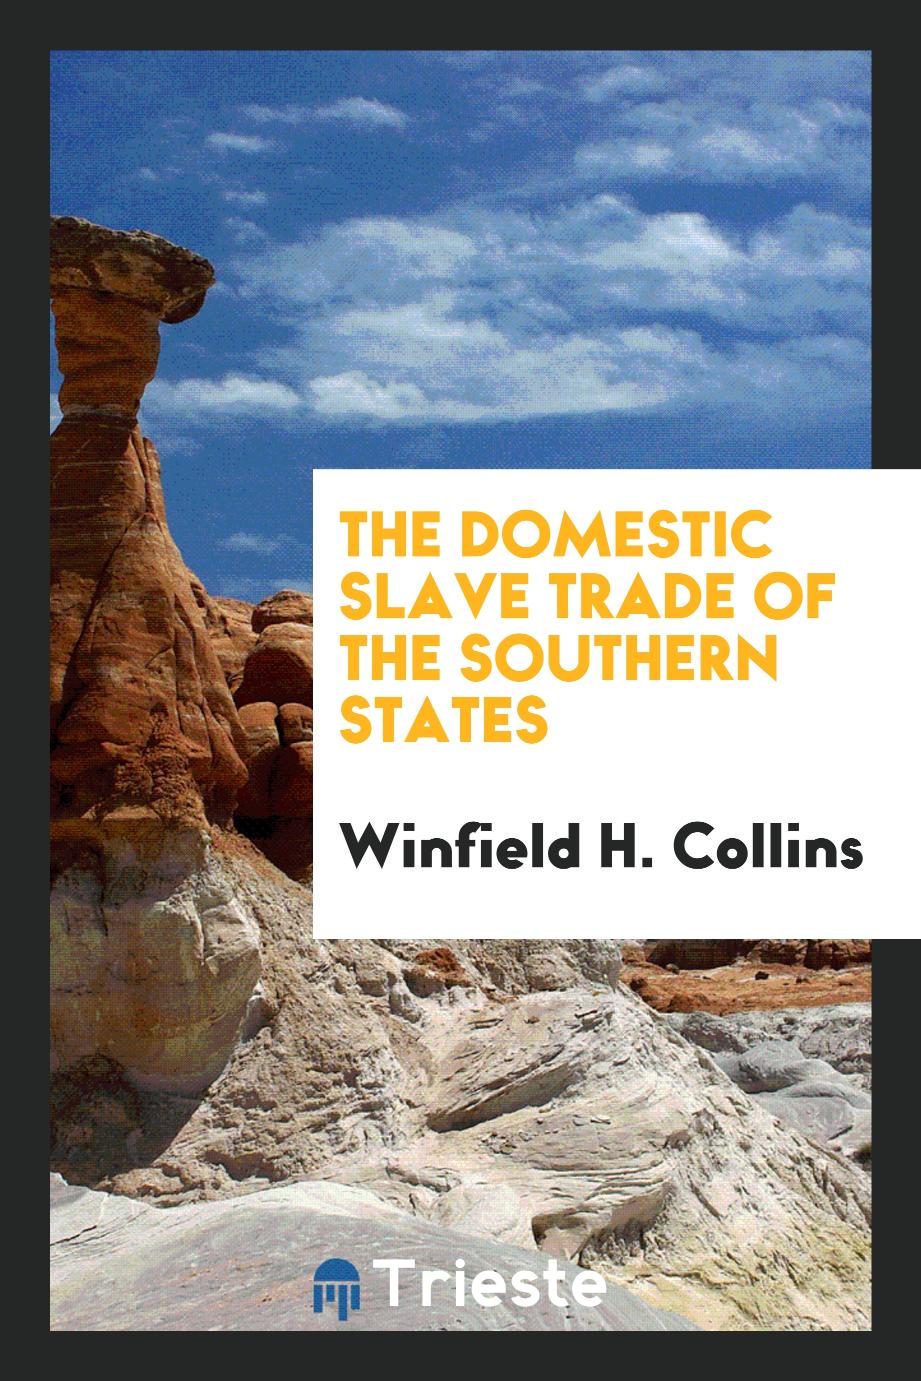 The Domestic Slave Trade of the Southern States